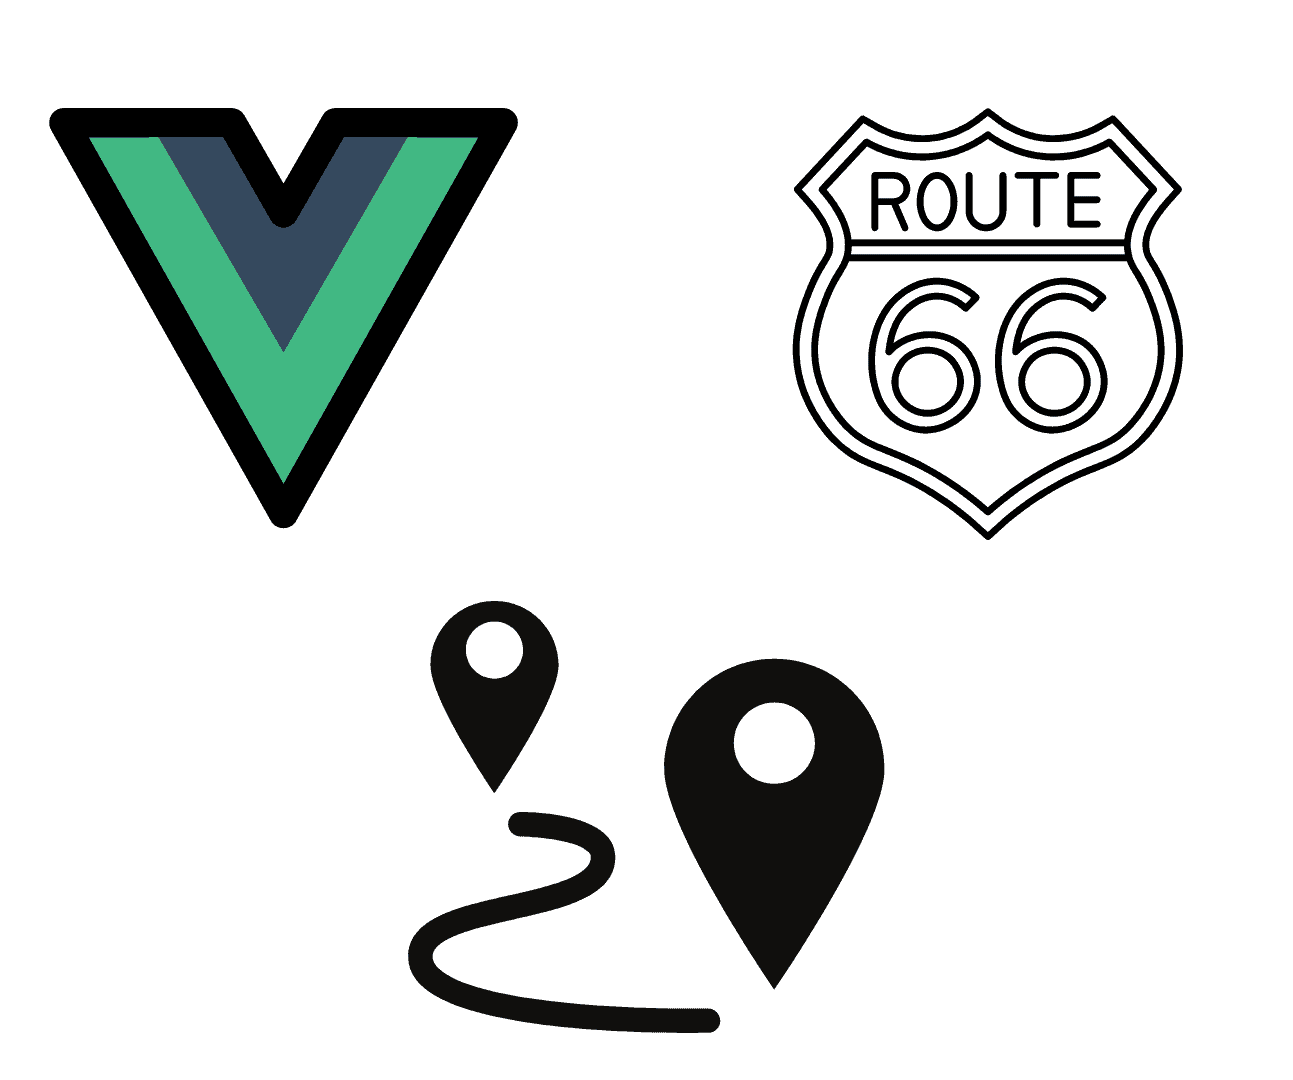 How to Implement Routing in Vue.js using vue-router